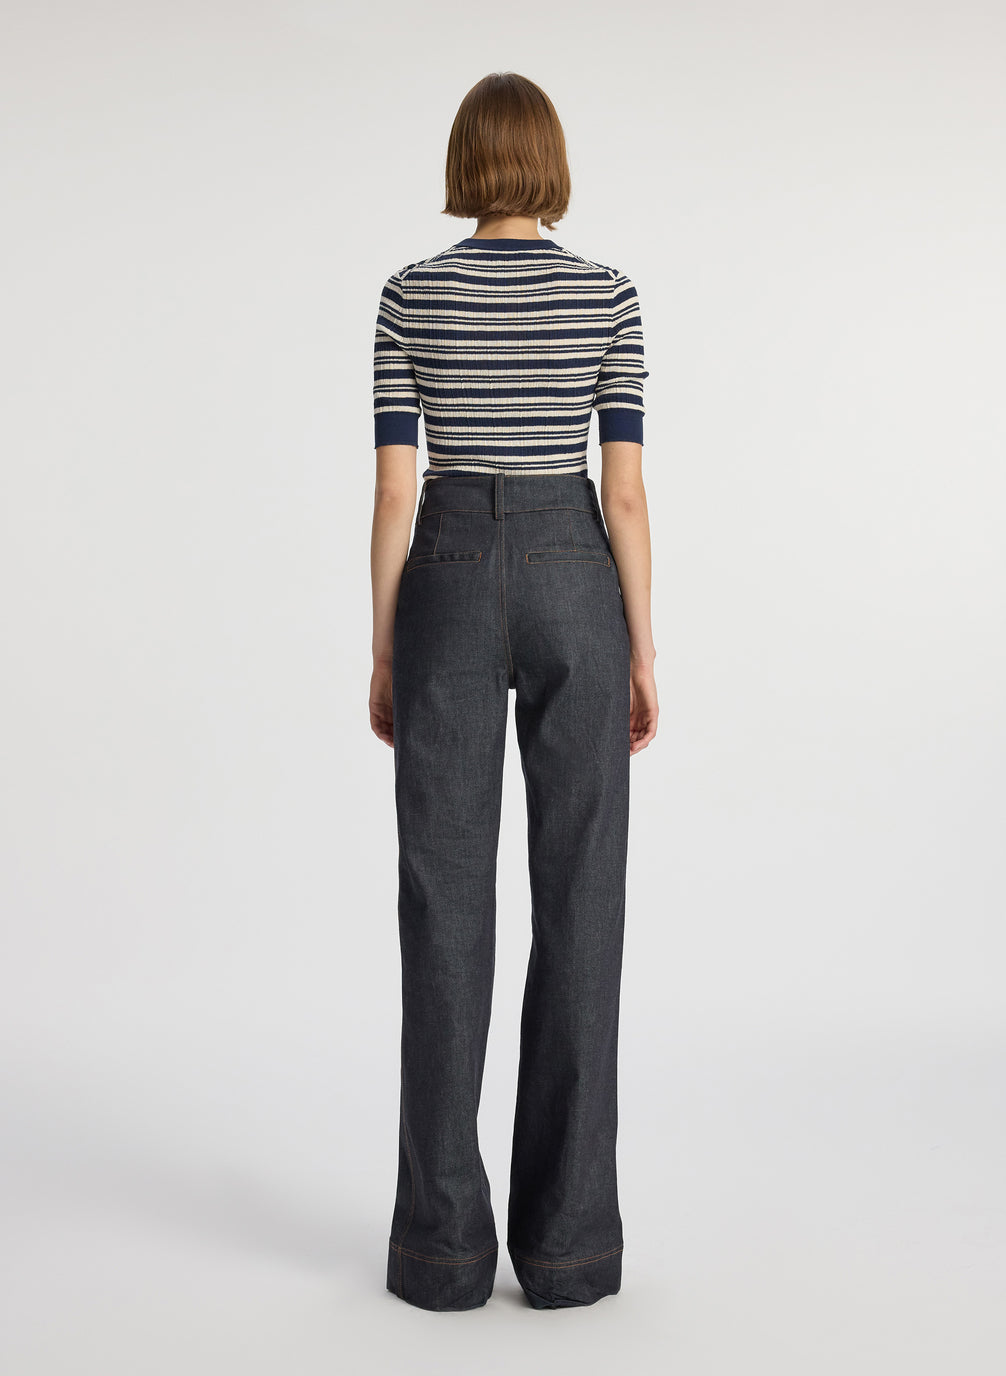 back  view of woman wearing navy blue striped half sleeve button placket shirt and dark wash raw denim jean